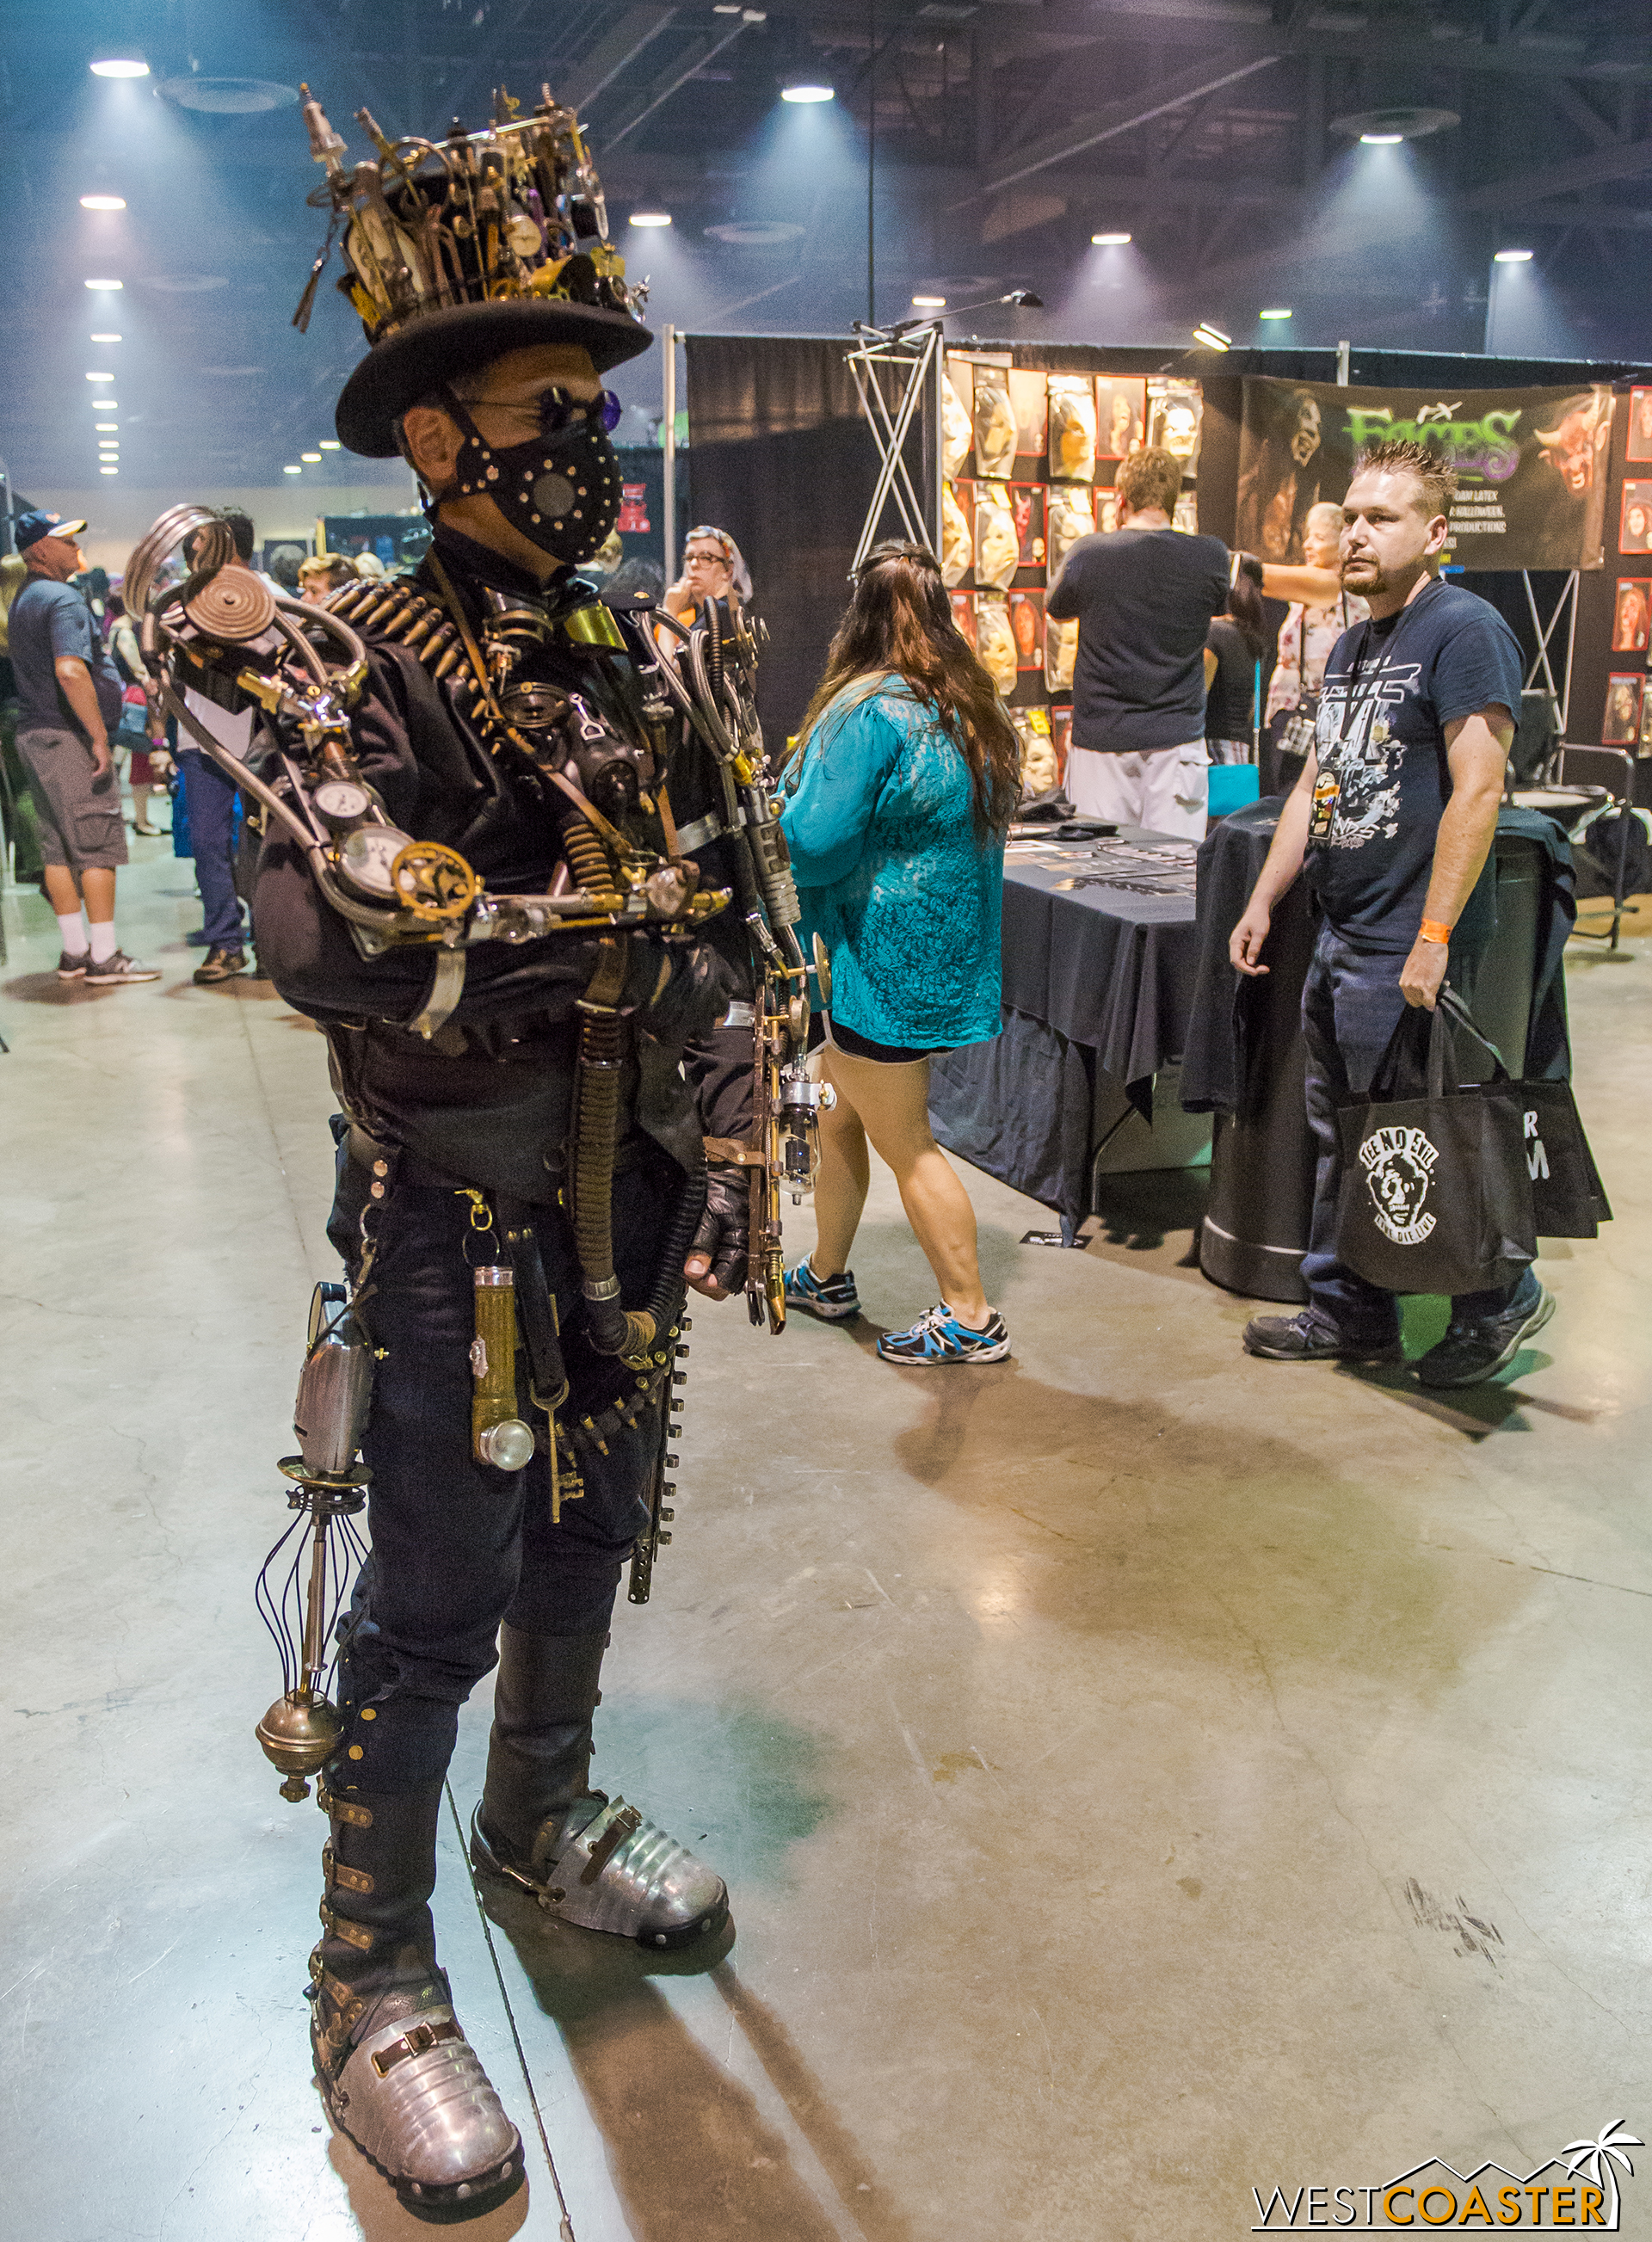  This gentleman's steampunk get-up was quite ornate and attracted plenty of attention. 